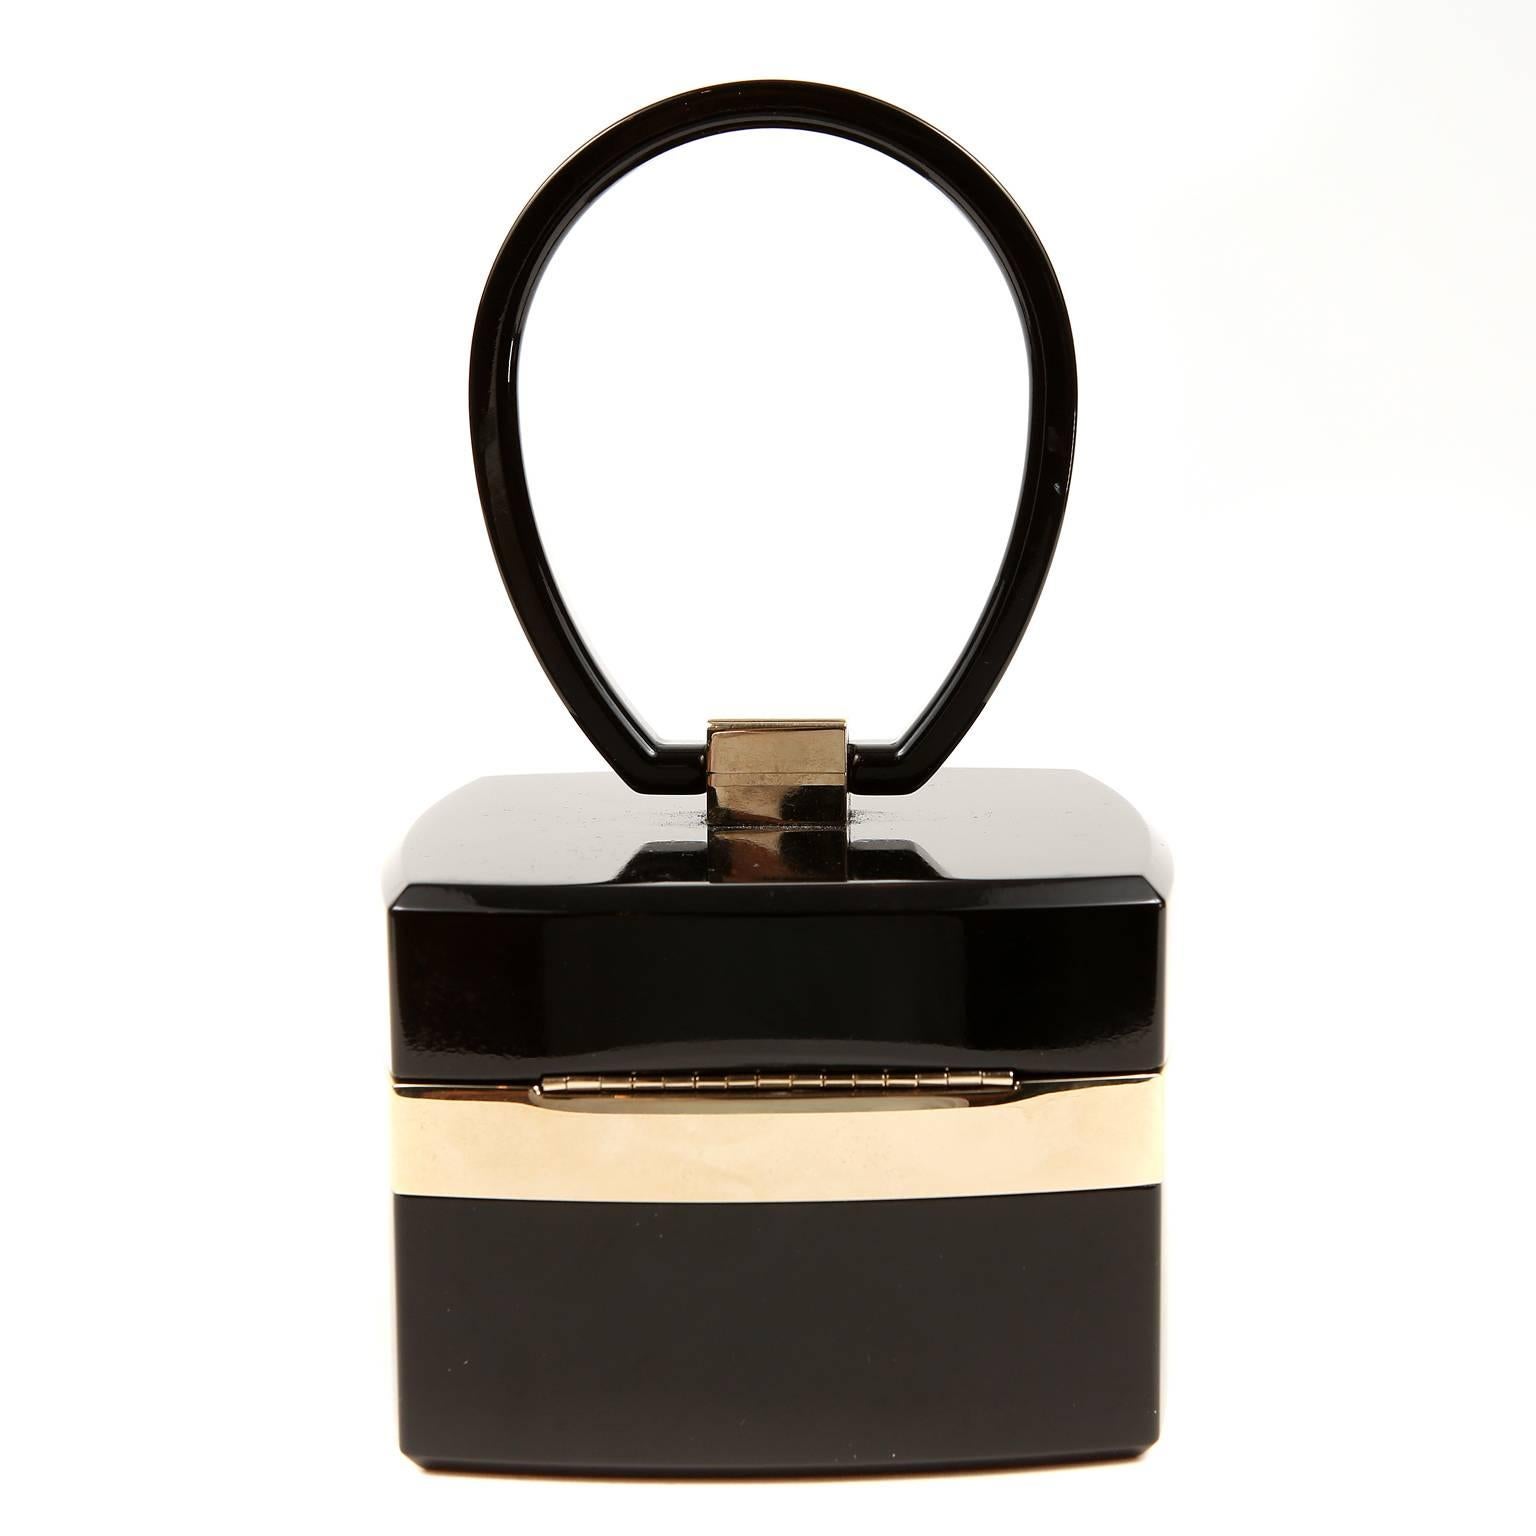 Chanel Black Lucite and Gold Devil Wears Prada Bag- PRISTINE
  From the 2004 collection, this exquisite collectible was featured in the movie titled, “Devil Wears Prada.”

Black Lucite square box style bag is accented with metallic gold.  CC clasp